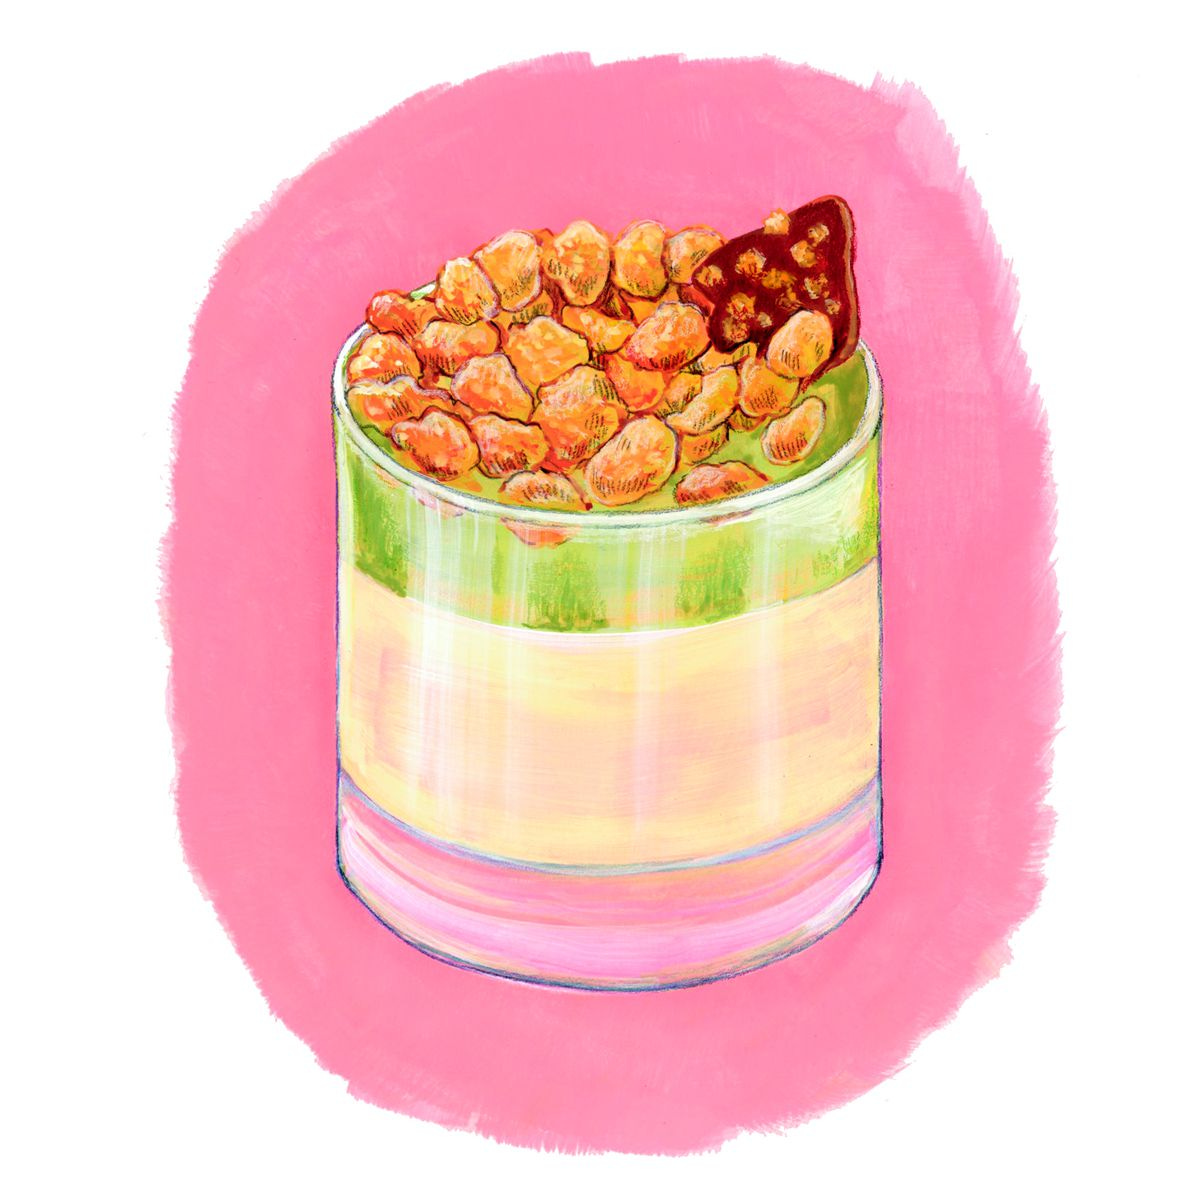 An illustration of a pandan panna cotta topped with corn flakes